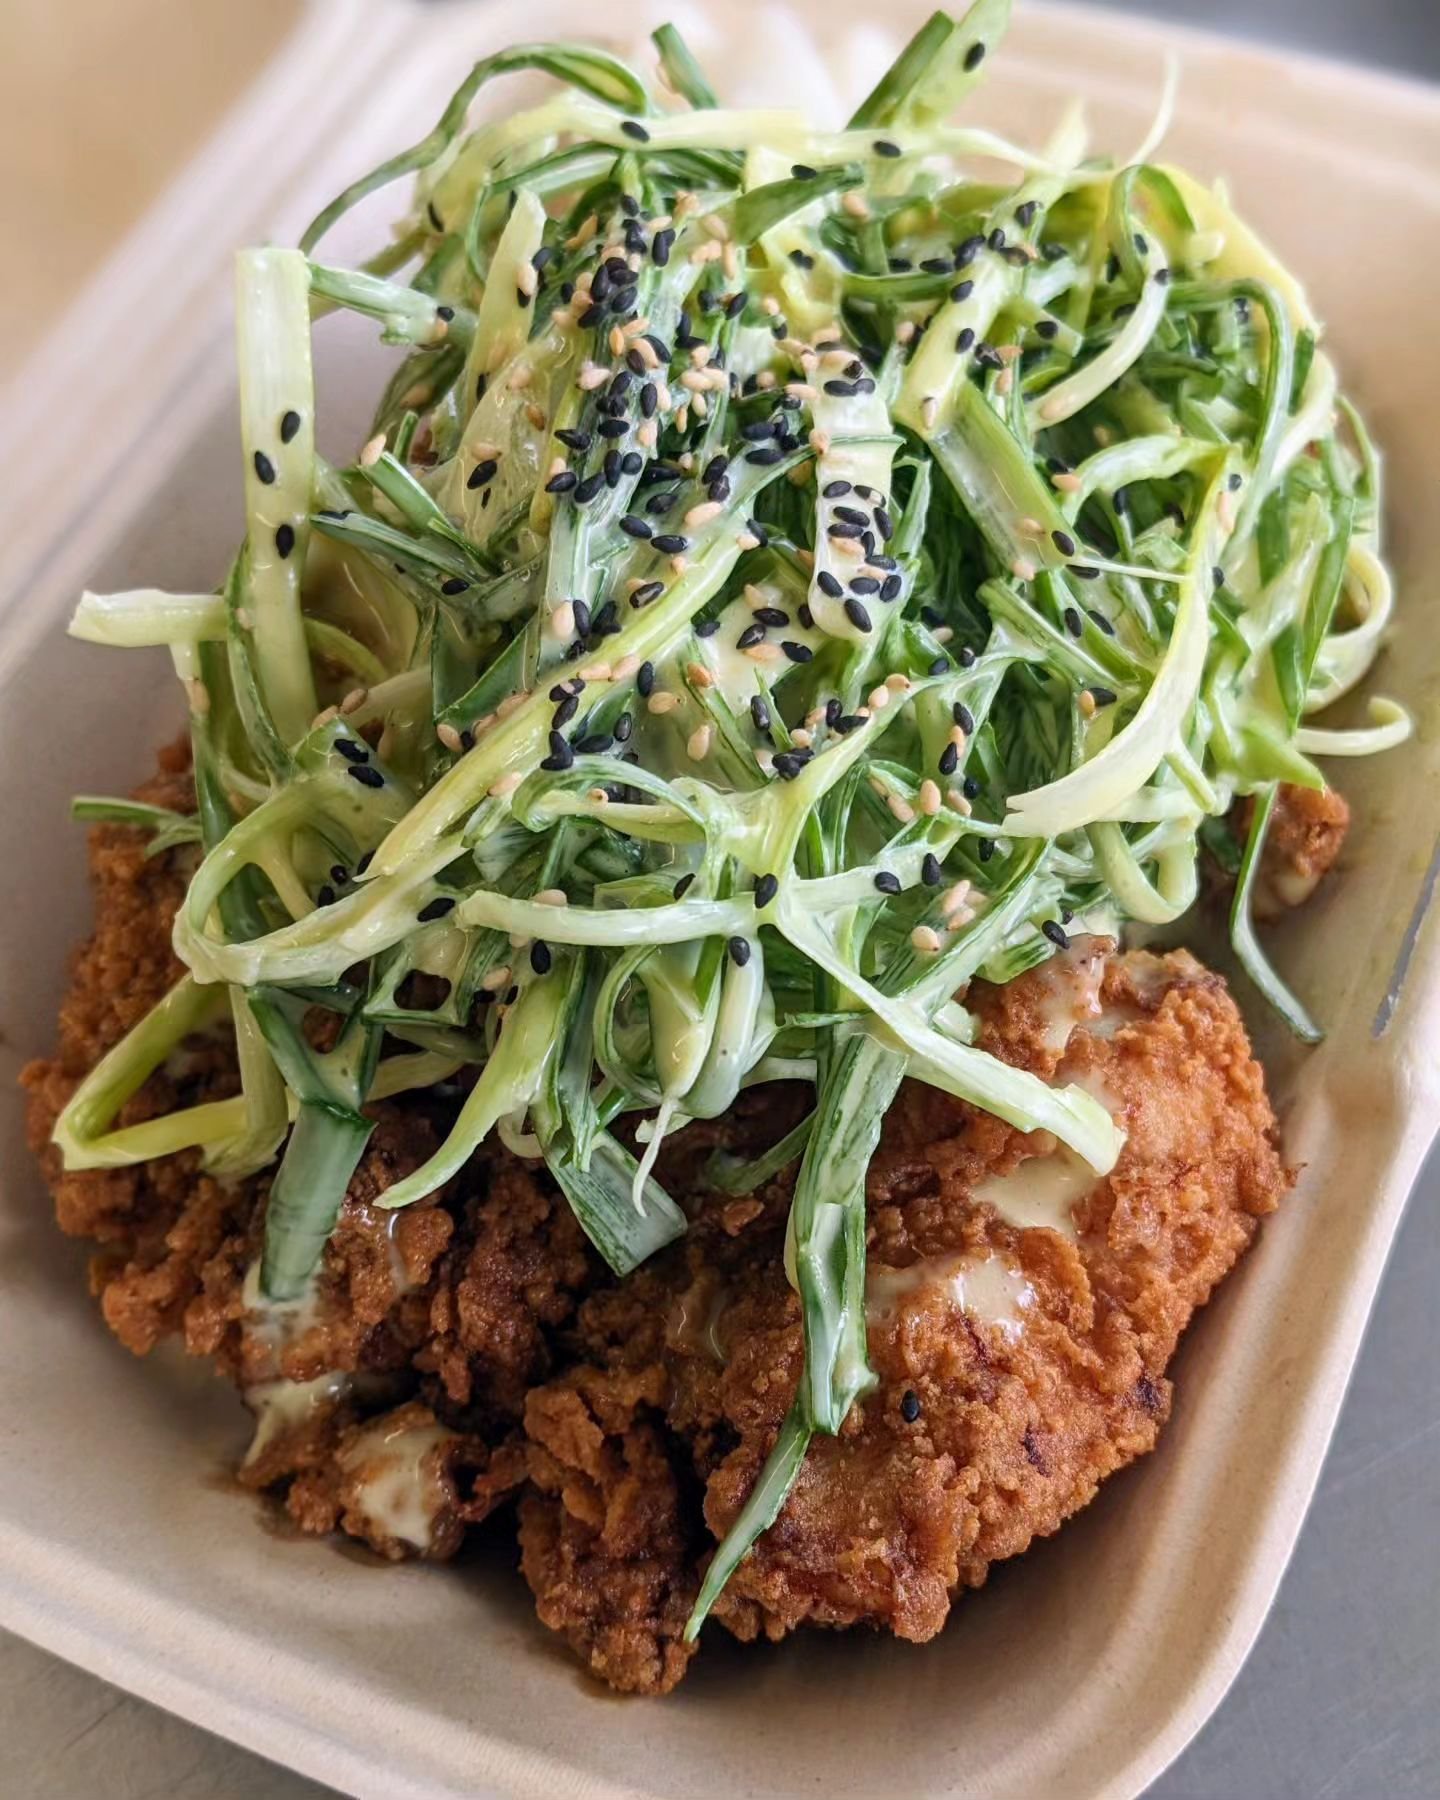 We love to keep things interesting and try out new flavors with specials, which is how the honey mustard green onion Korean fried chicken came around this past week!

Adding this bad boy to the rotation of occasional specials! 🔥